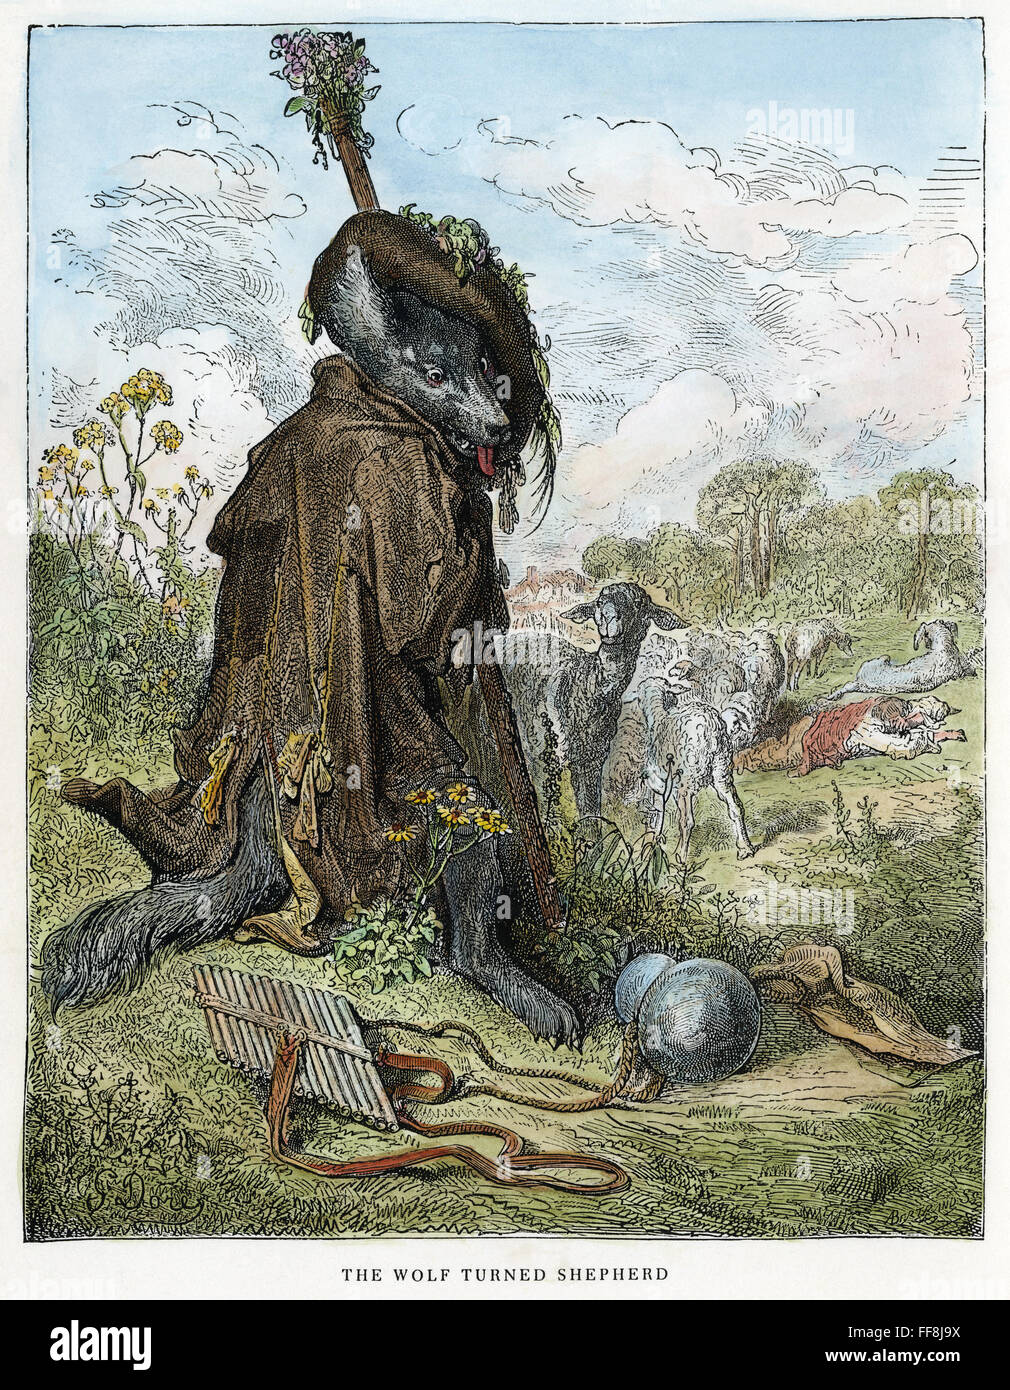 LA FONTAINE: WOLF. /n'The Wolf Turned Shepherd.' Wood engraving after Gustave DorΘ for the 'Fables' of Jean de La Fontaine, c1870. Stock Photo